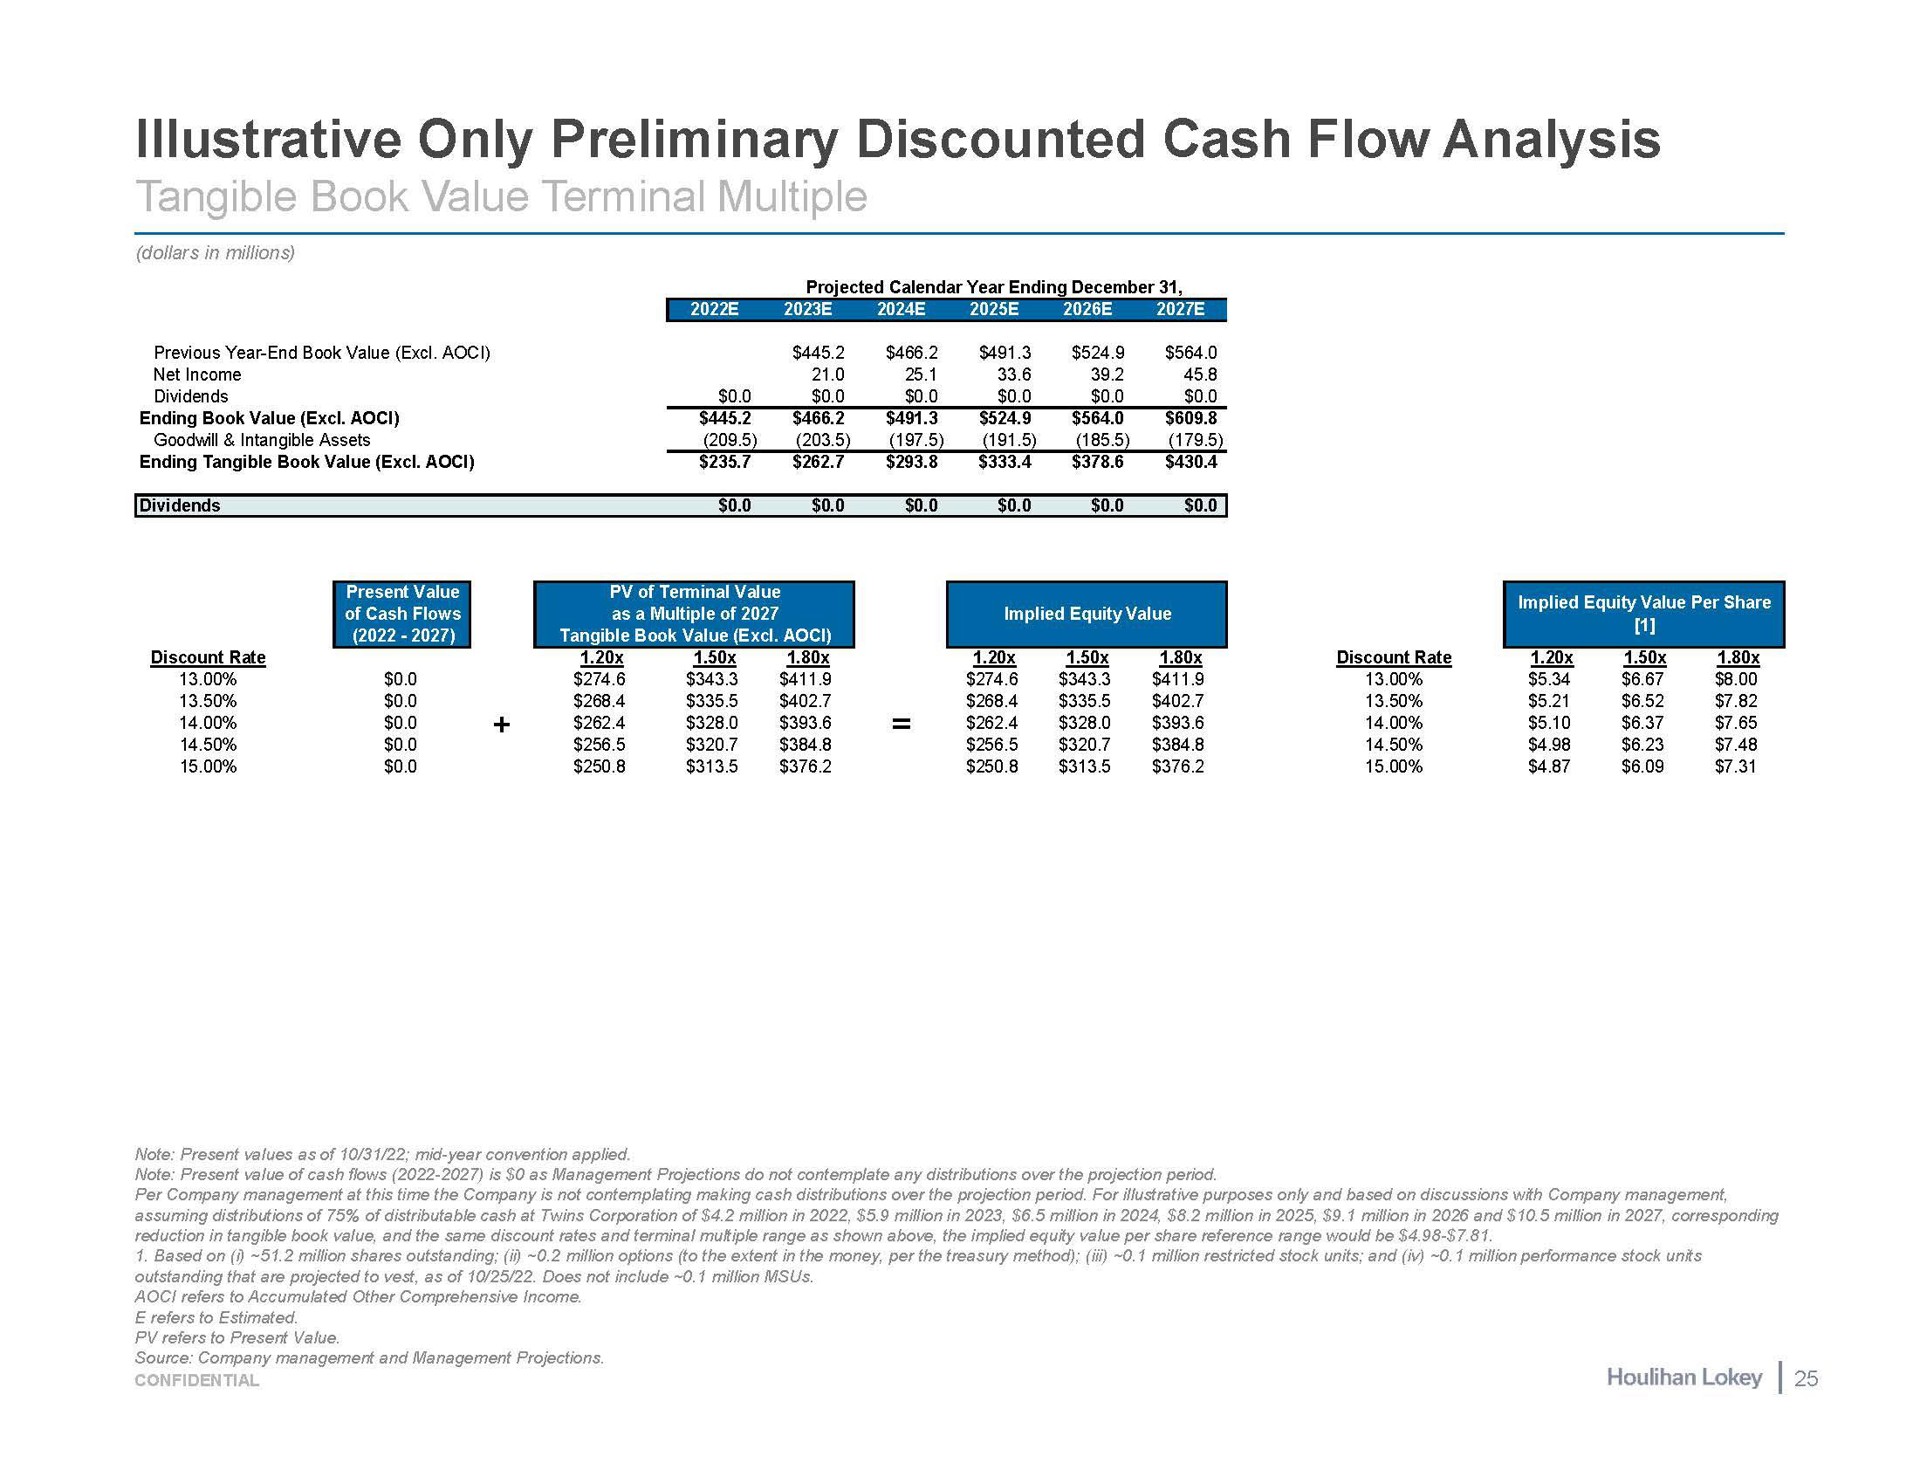 illustrative only preliminary discounted cash flow analysis | Houlihan Lokey